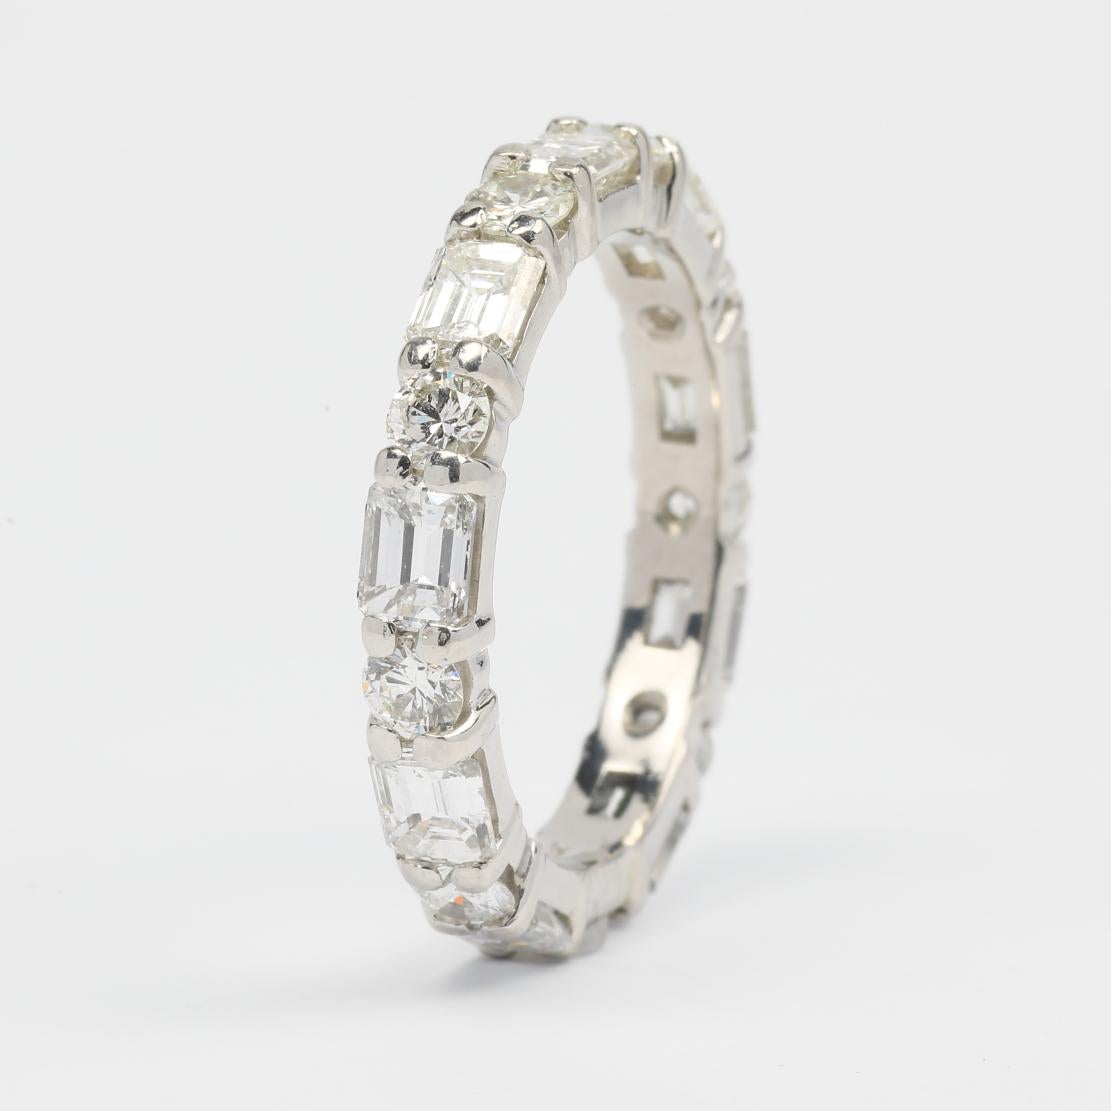 Classy Mixed Shaped Eternity Band Ring, featuring:
✧ Shared prong set natural diamonds weighing approx. 4.30 tcw  (F-G color, VS clarity)
✧ Approximately 5.80 grams of Platinum
✧ Free appraisal included with your purchase
✧ Comes with beautiful